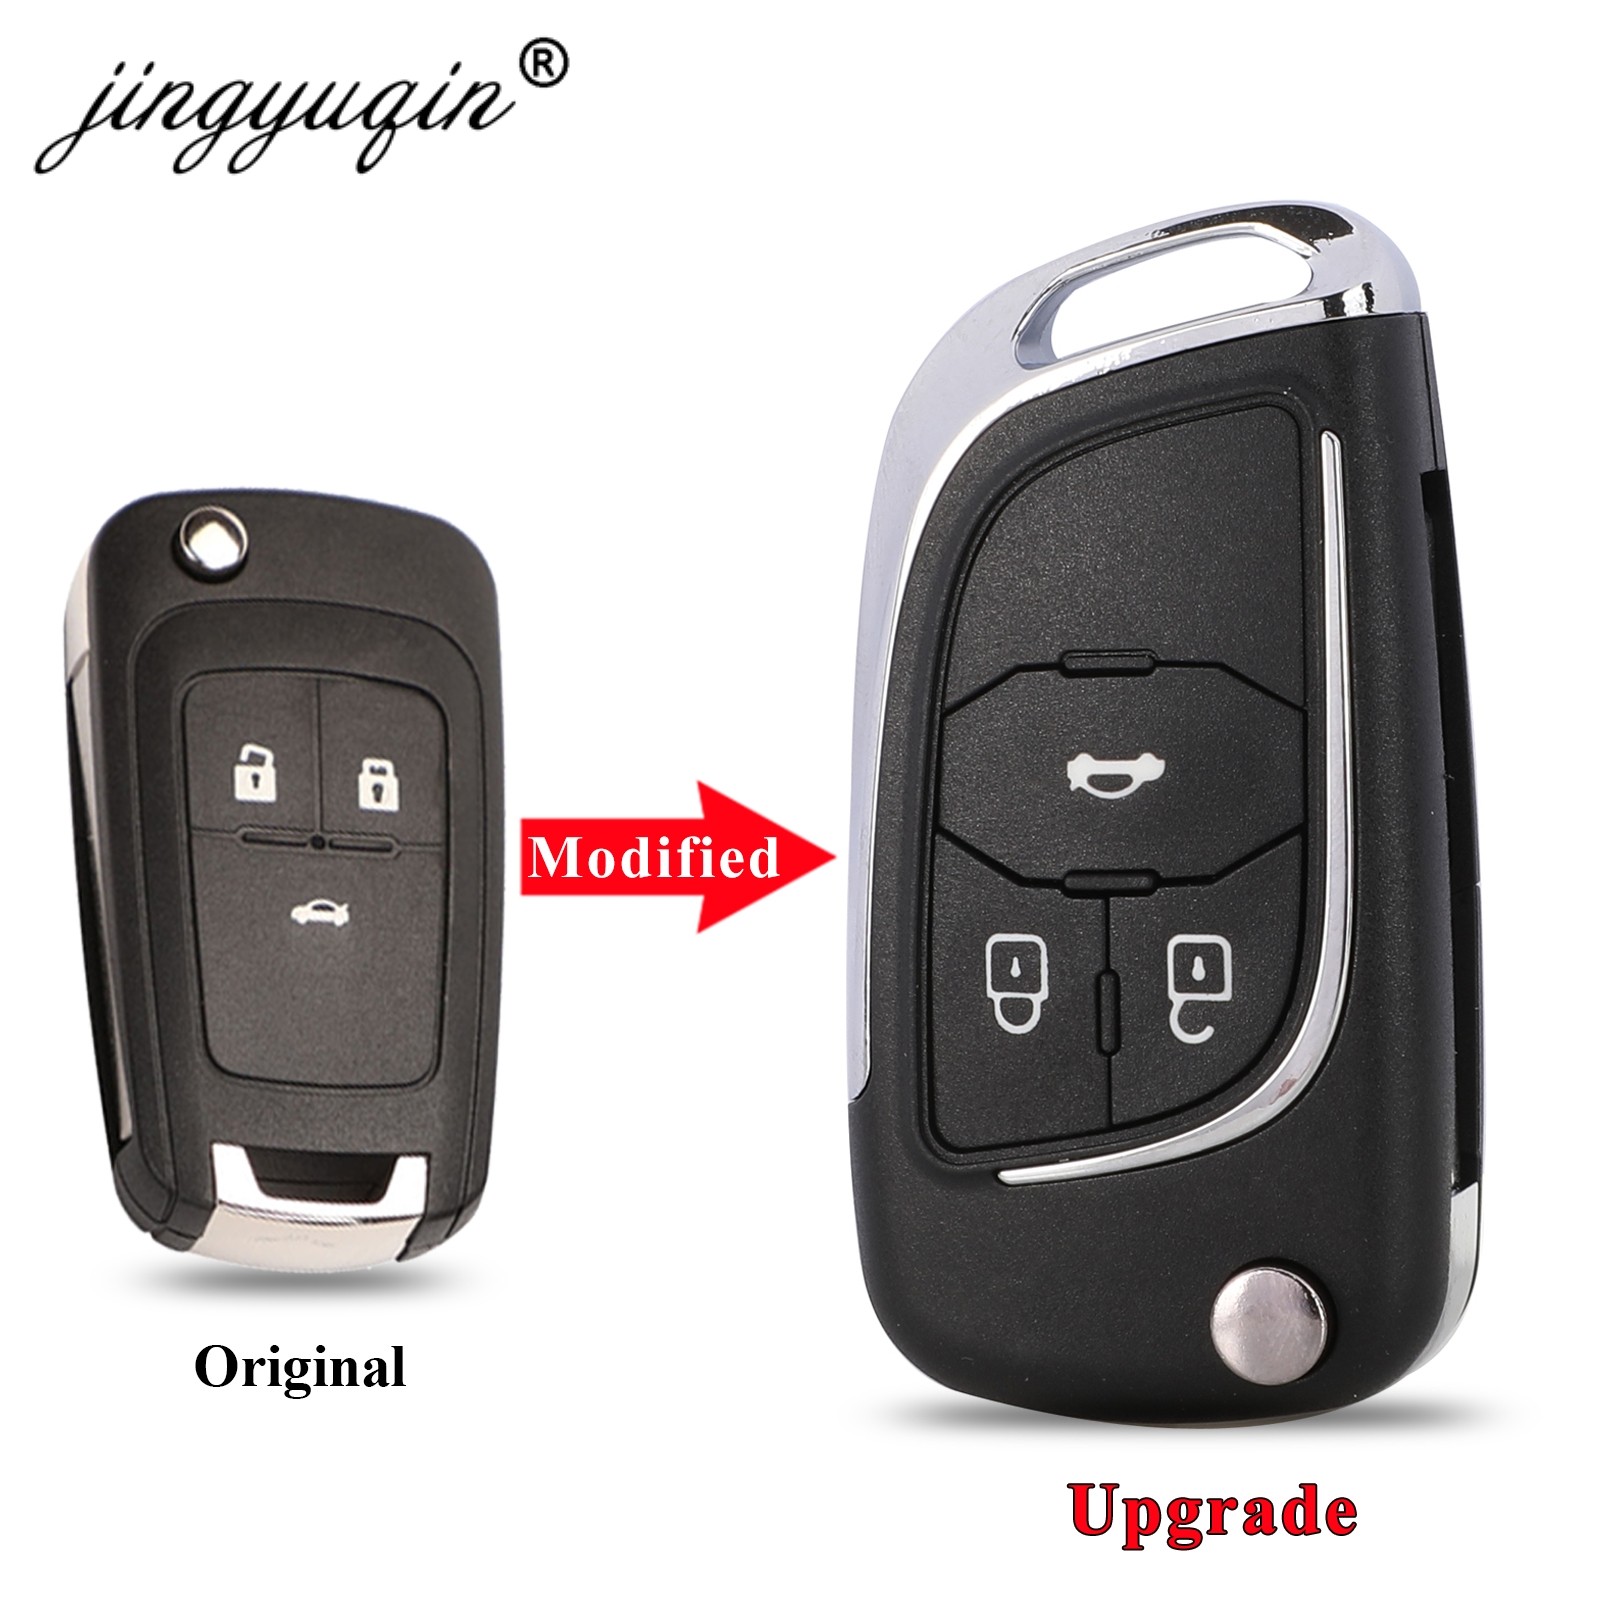 Remote Control Car Key for Chevrolet, Housing for Chevrolet Cruze, Epica, Lova, Camaro, Compatible with Buick, Opel, Vauxhall, Insignia Astra, 2/3/45B